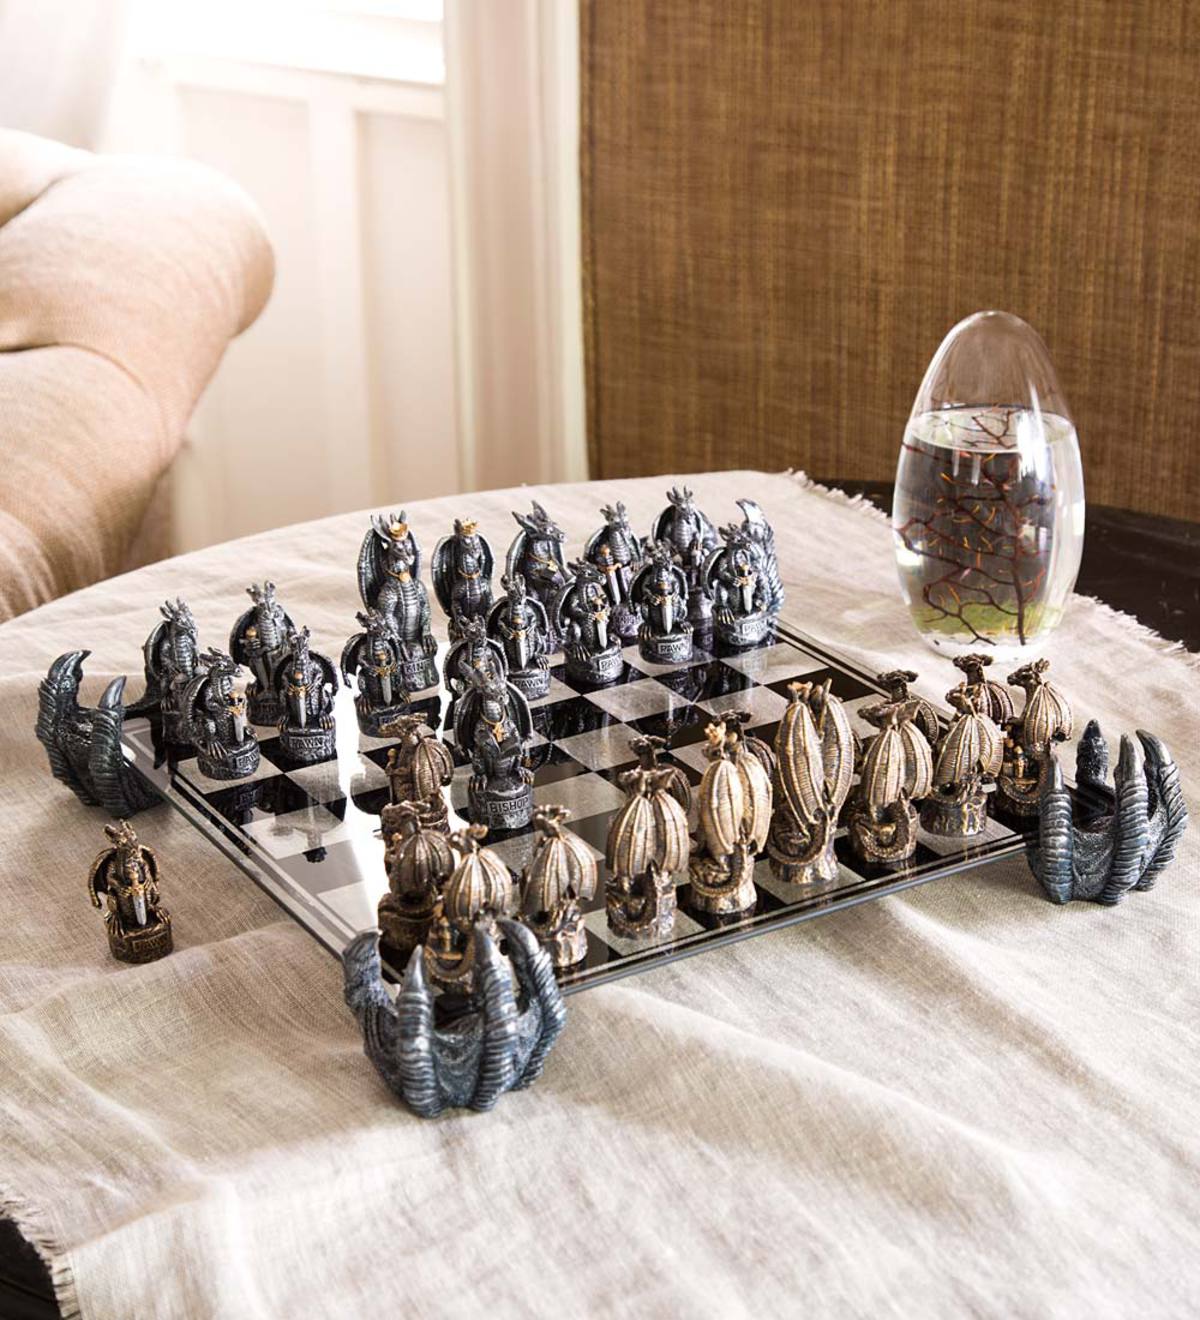 4-way Chess Set 4-player Chess Board Games Medieval Chess Set With